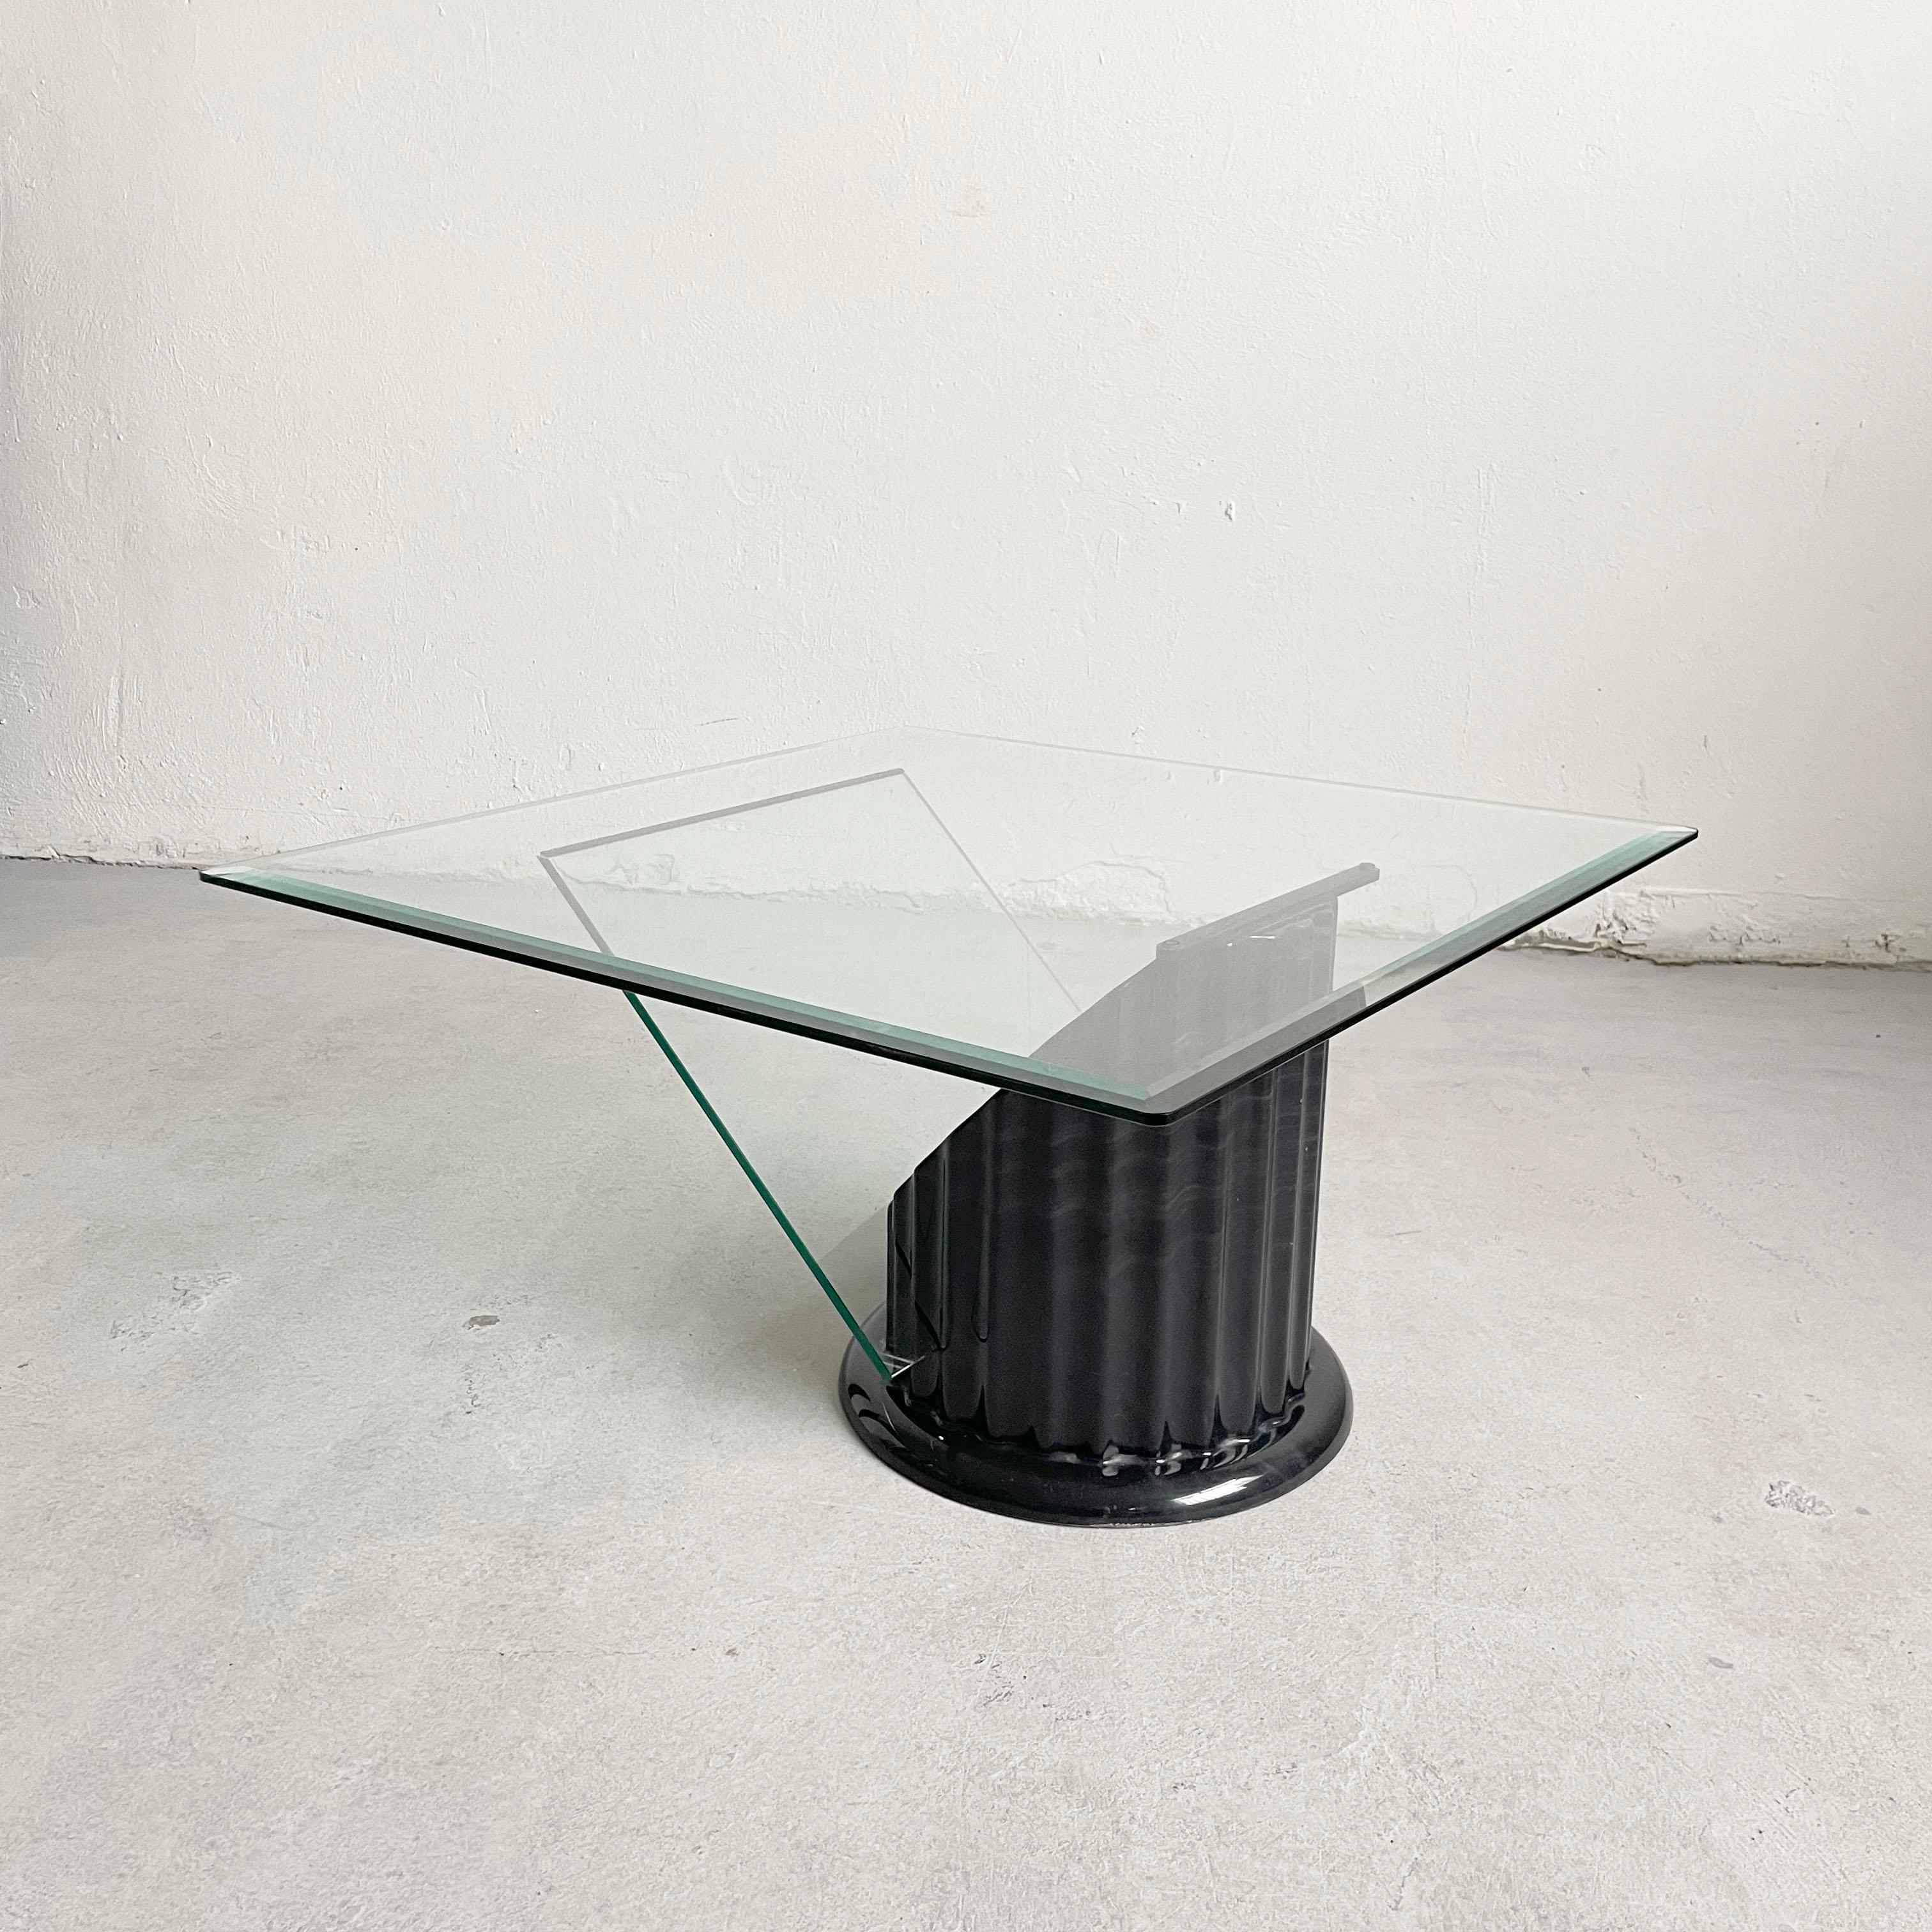 Postmodern Sculptural Coffee Table, Black Faux Marble and Glass, 1980s For Sale 7